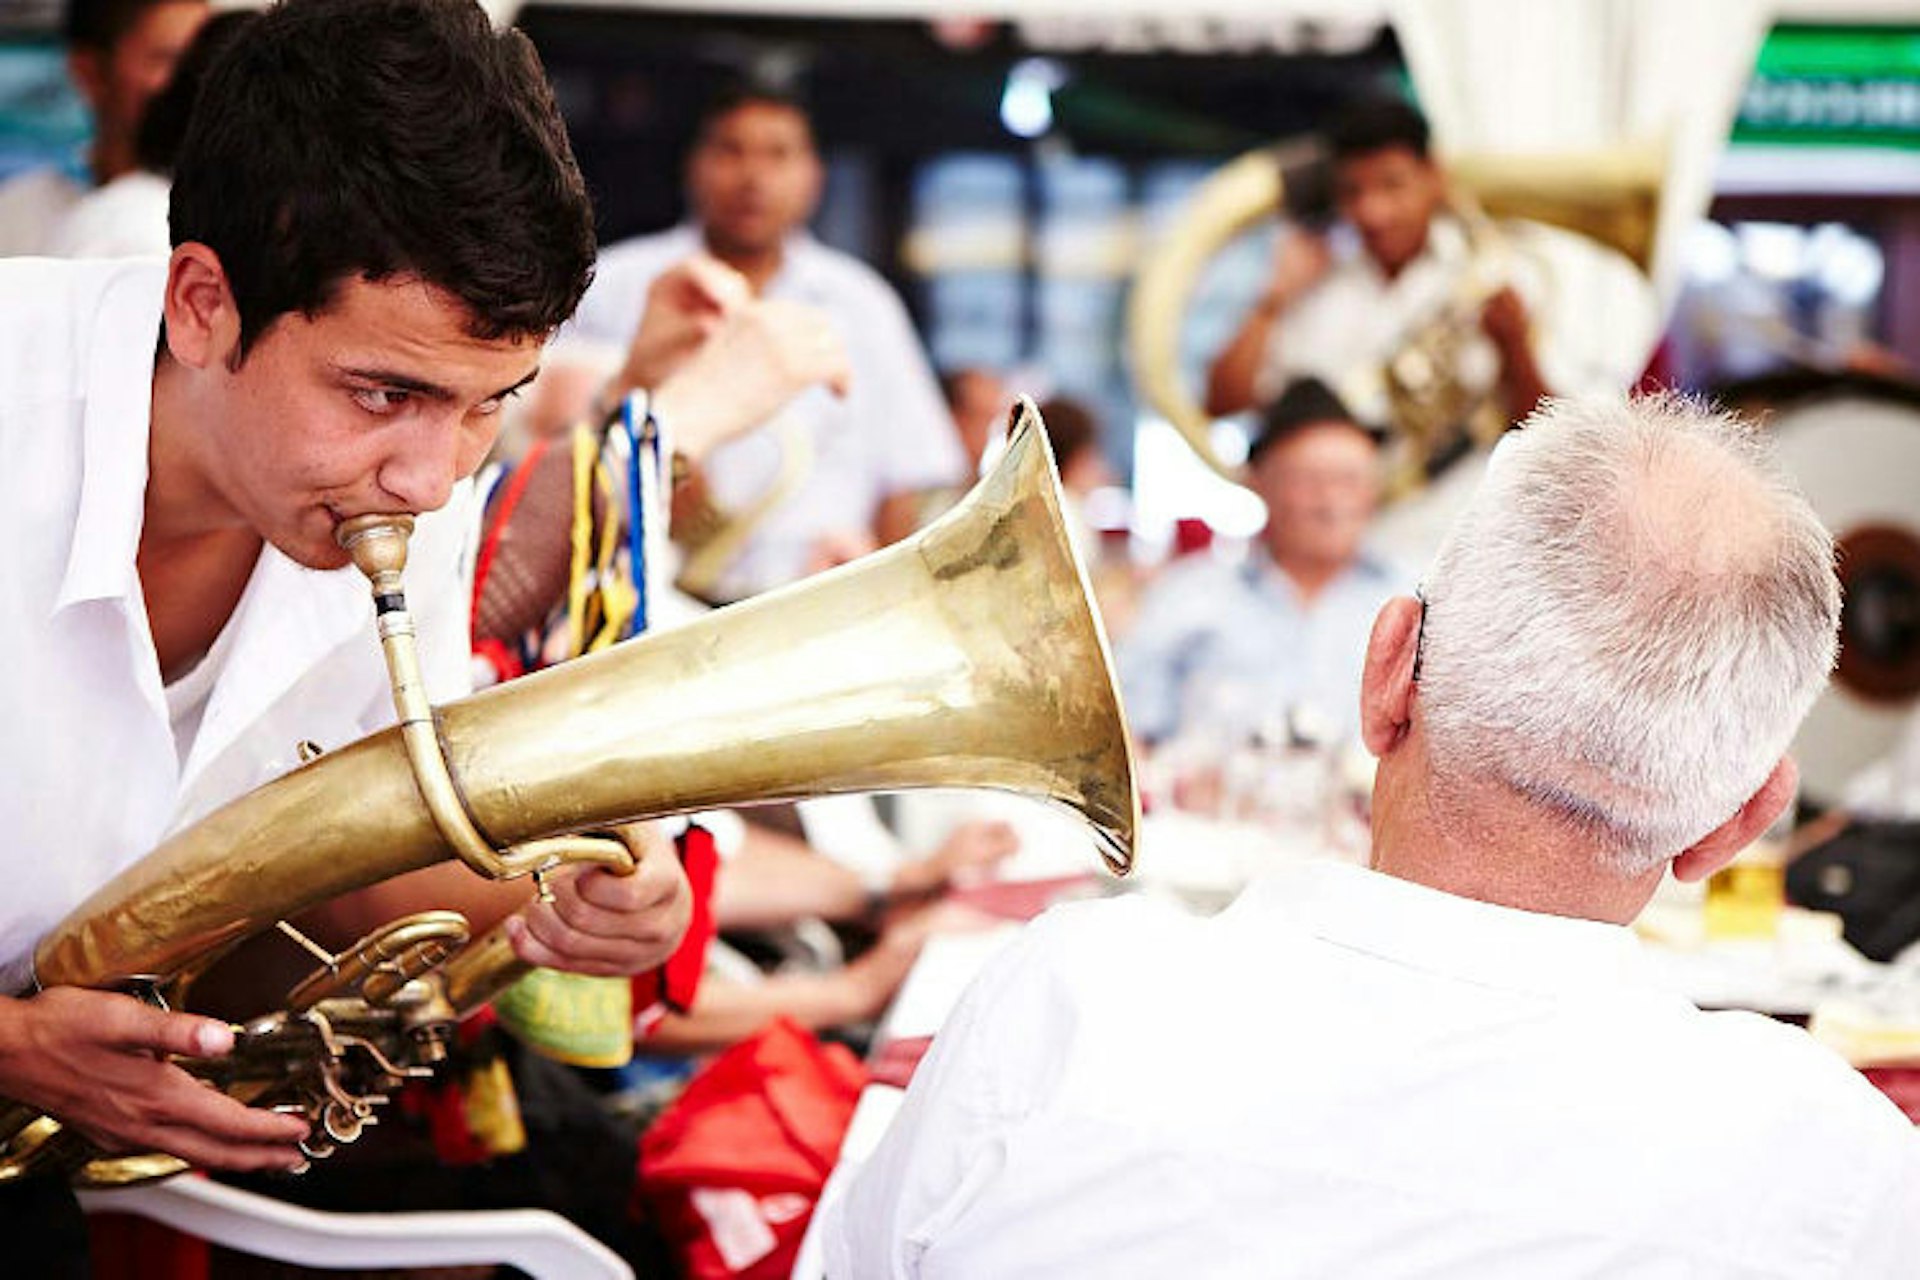 Typical scene from the Guča trumpet festival. Image by Matt Munro / Lonely Planet